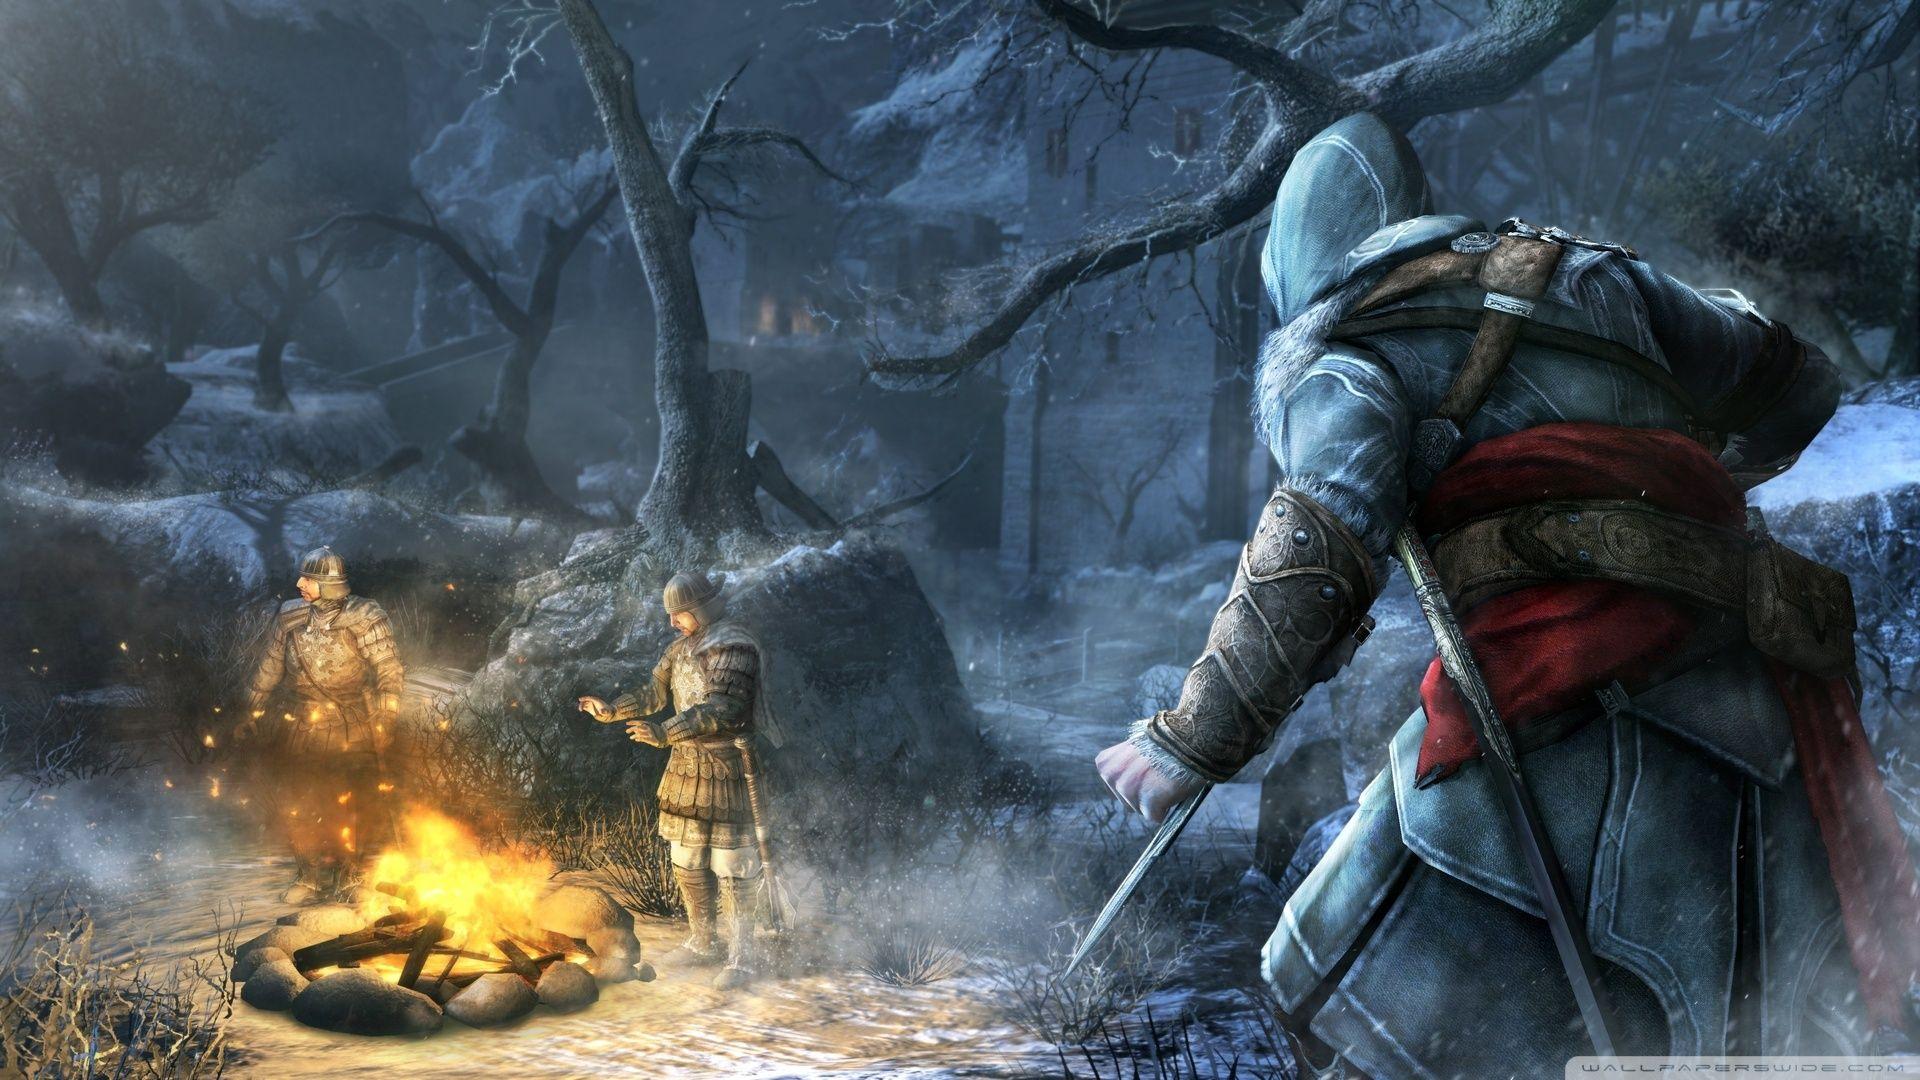 Assassin's Creed: Revelations HD Wallpaper. I Have A PC